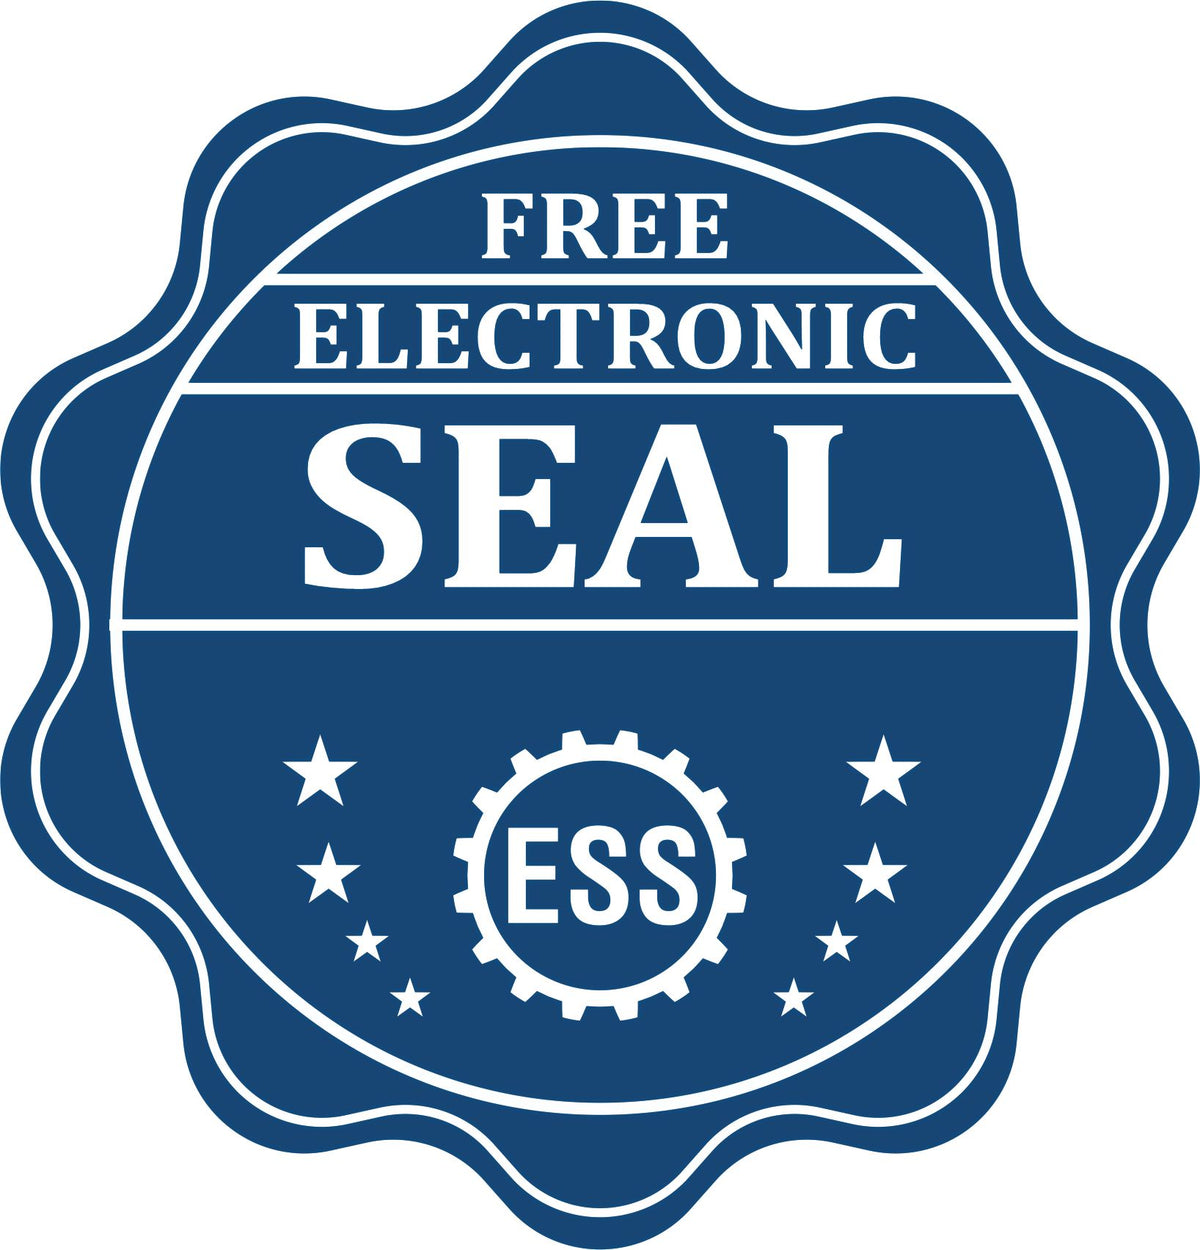 A badge showing a free electronic seal for the Hybrid Connecticut Landscape Architect Seal with stars and the ESS gear on the emblem.